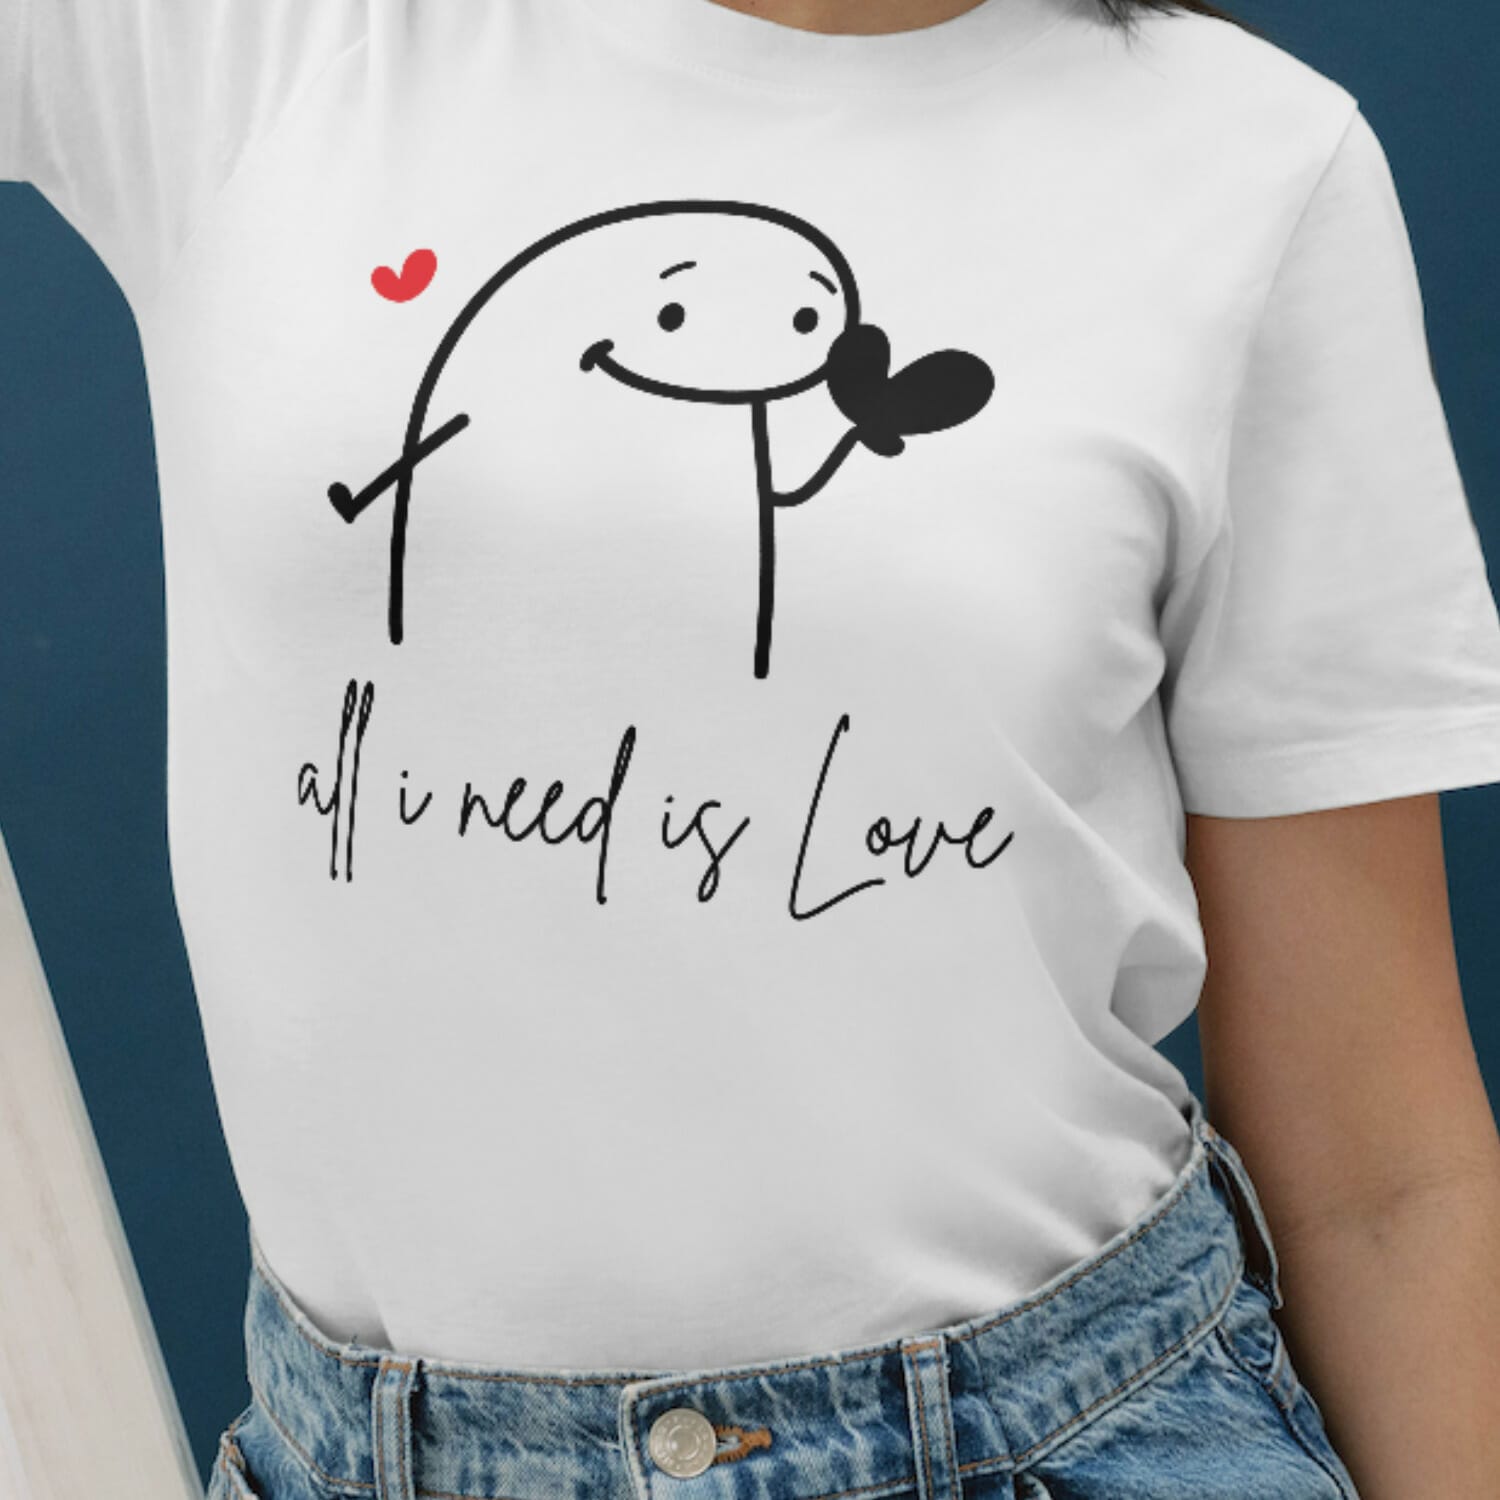 "All you need is love, and our 'All I Need is Love' Valentine's Day T-shirt Design. Download now to wear your heart on your sleeve!"